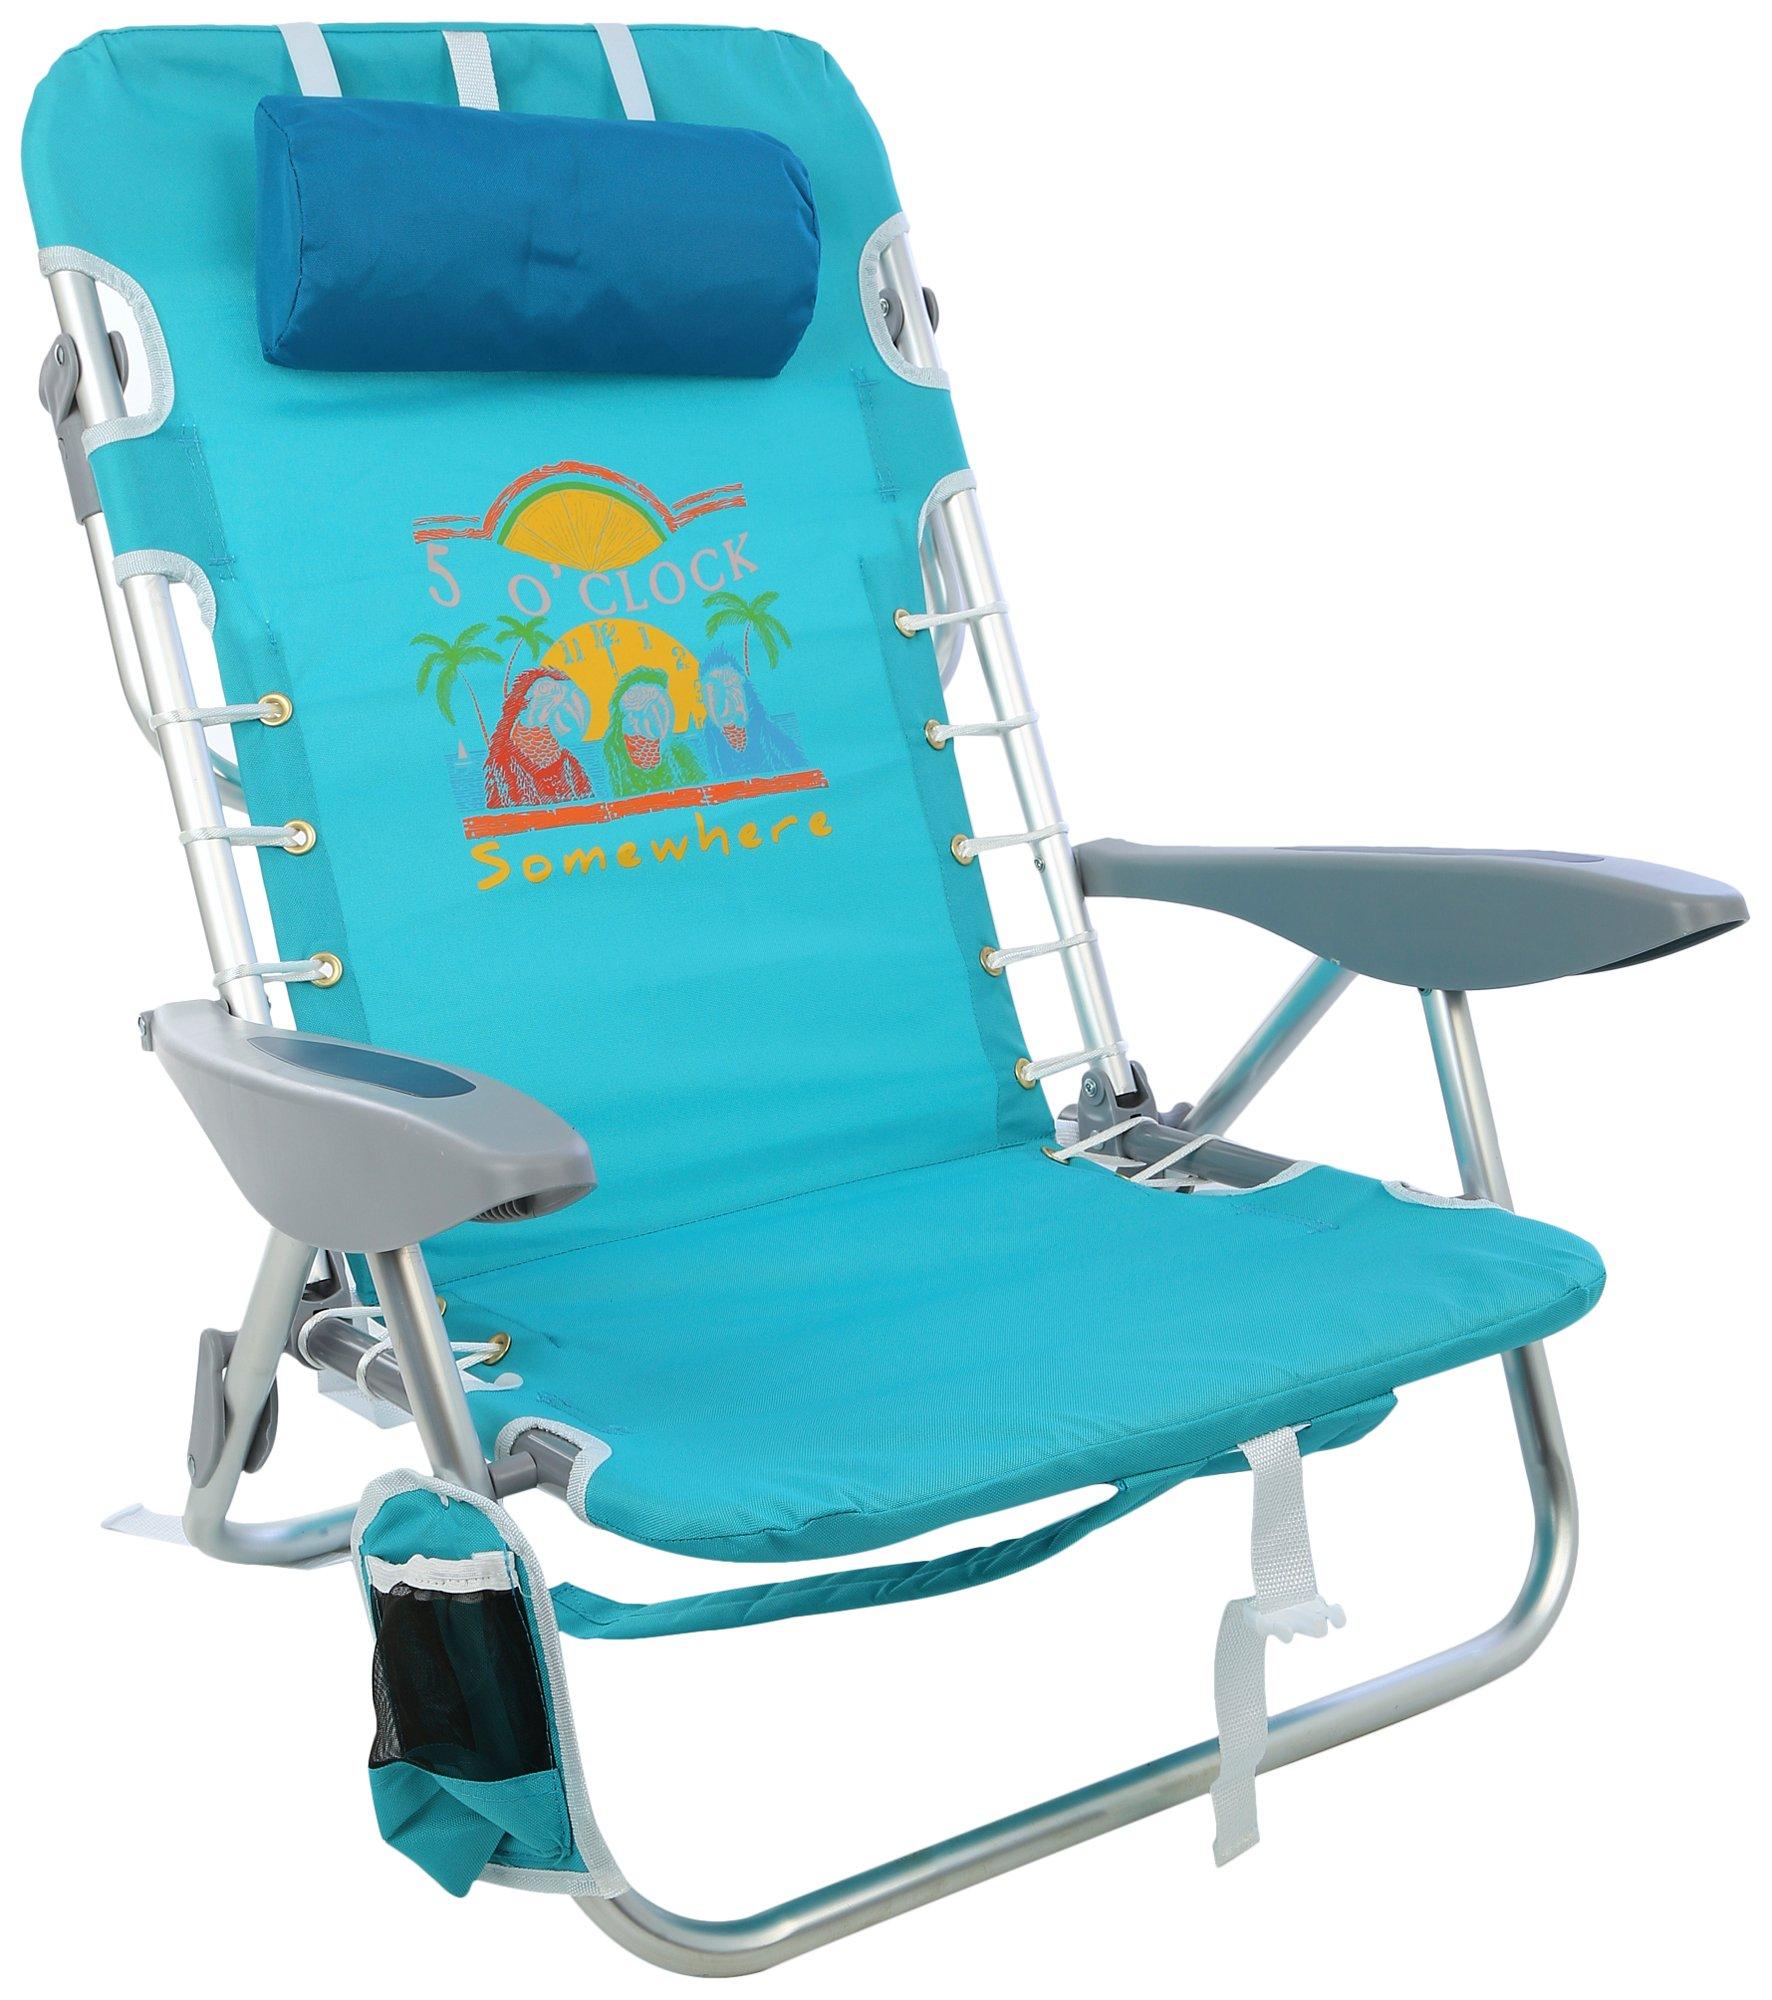 Margaritaville 4-Position Lay-Flat Backpack Chair